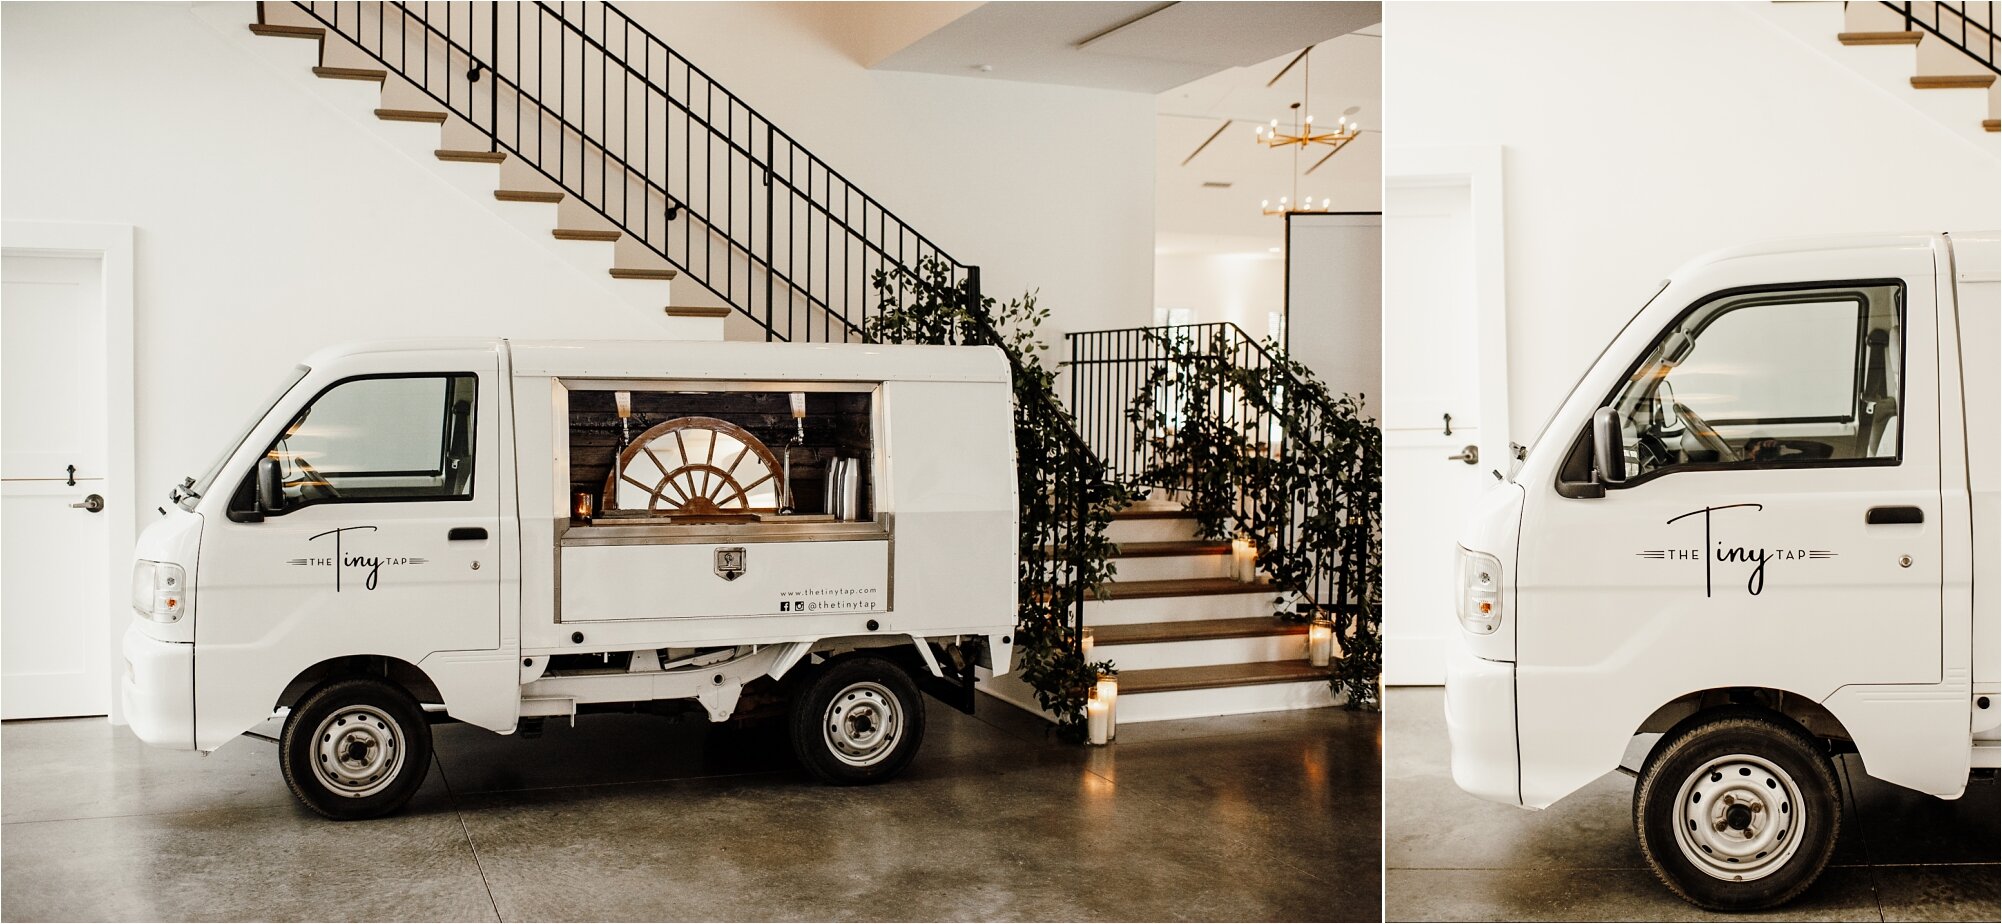  the tiny tap prosecco truck at hutton house wedding venue in minnesota mobile bar beverage drinks champagne 